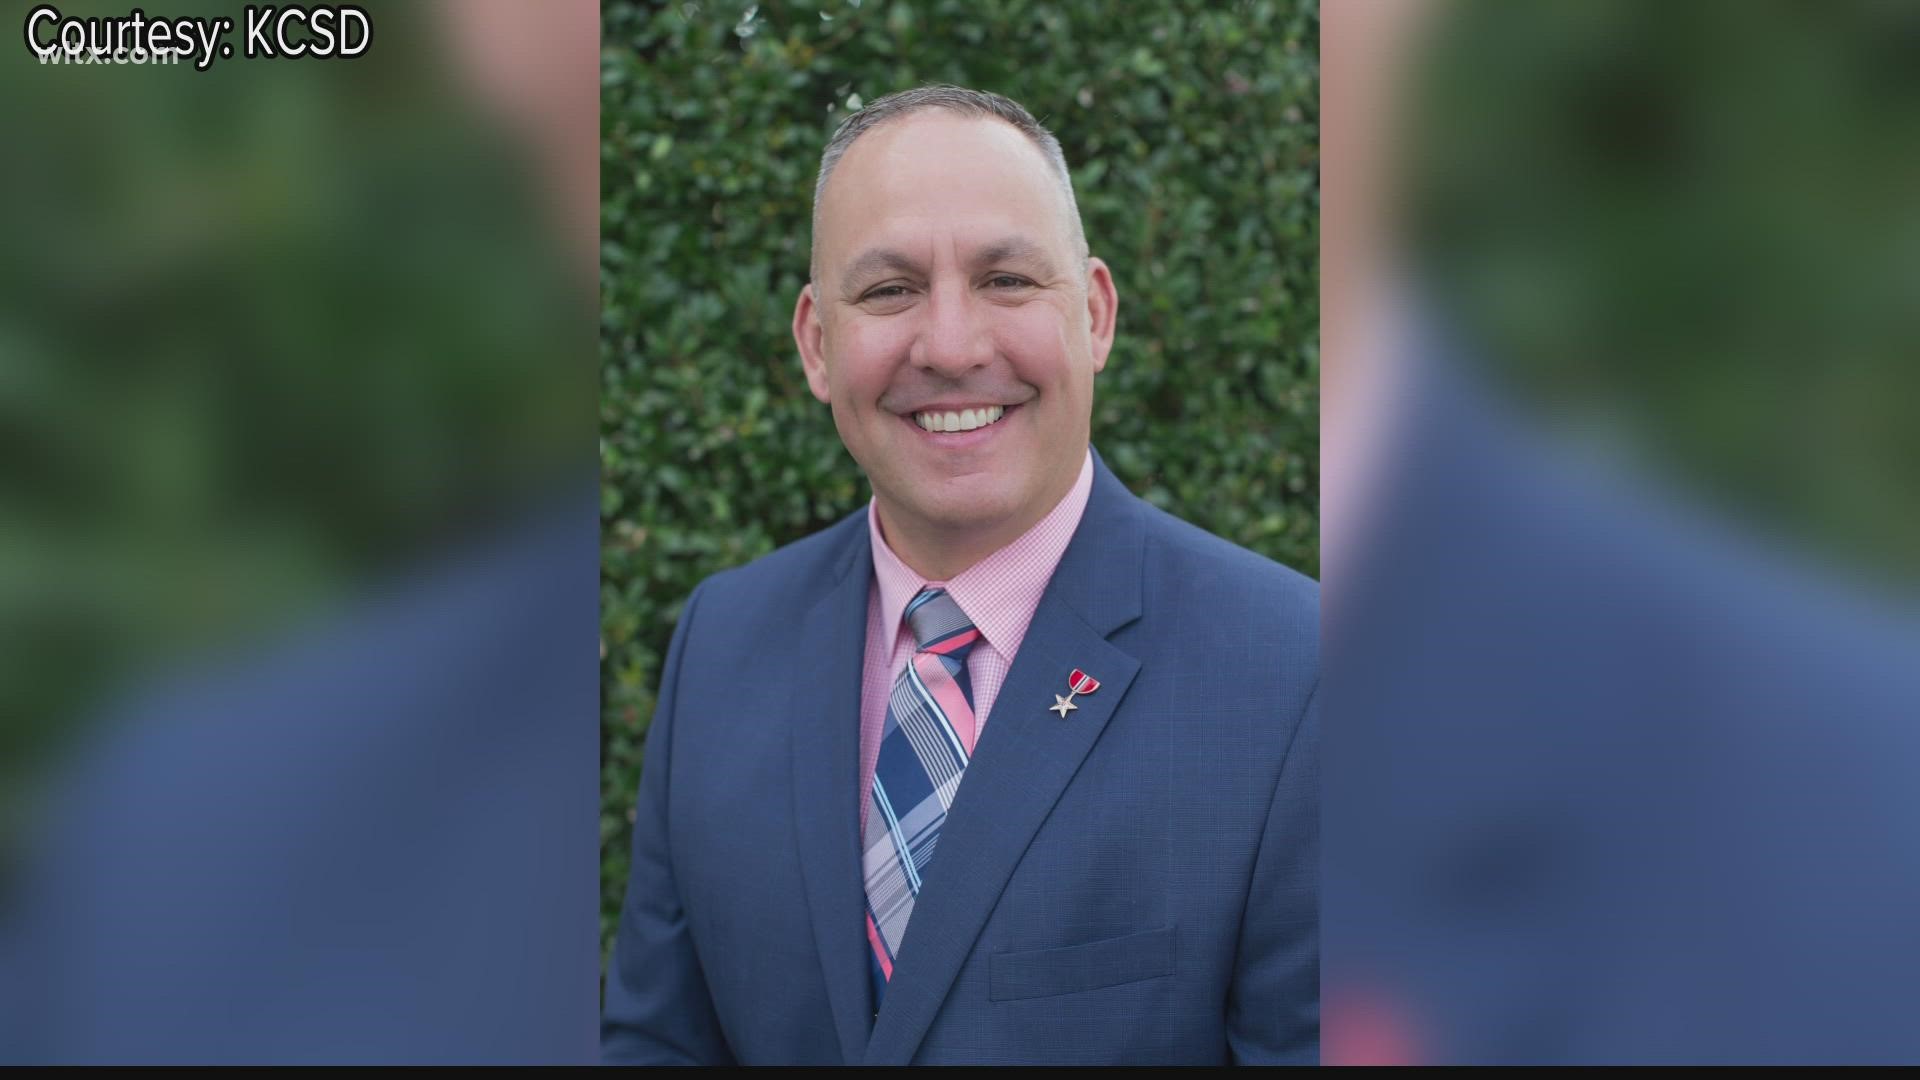 Kershaw County Superintendent Dr. Shane Robbins is leaving the district to accept a position in Dorchester County, a role he will begin on July 1.